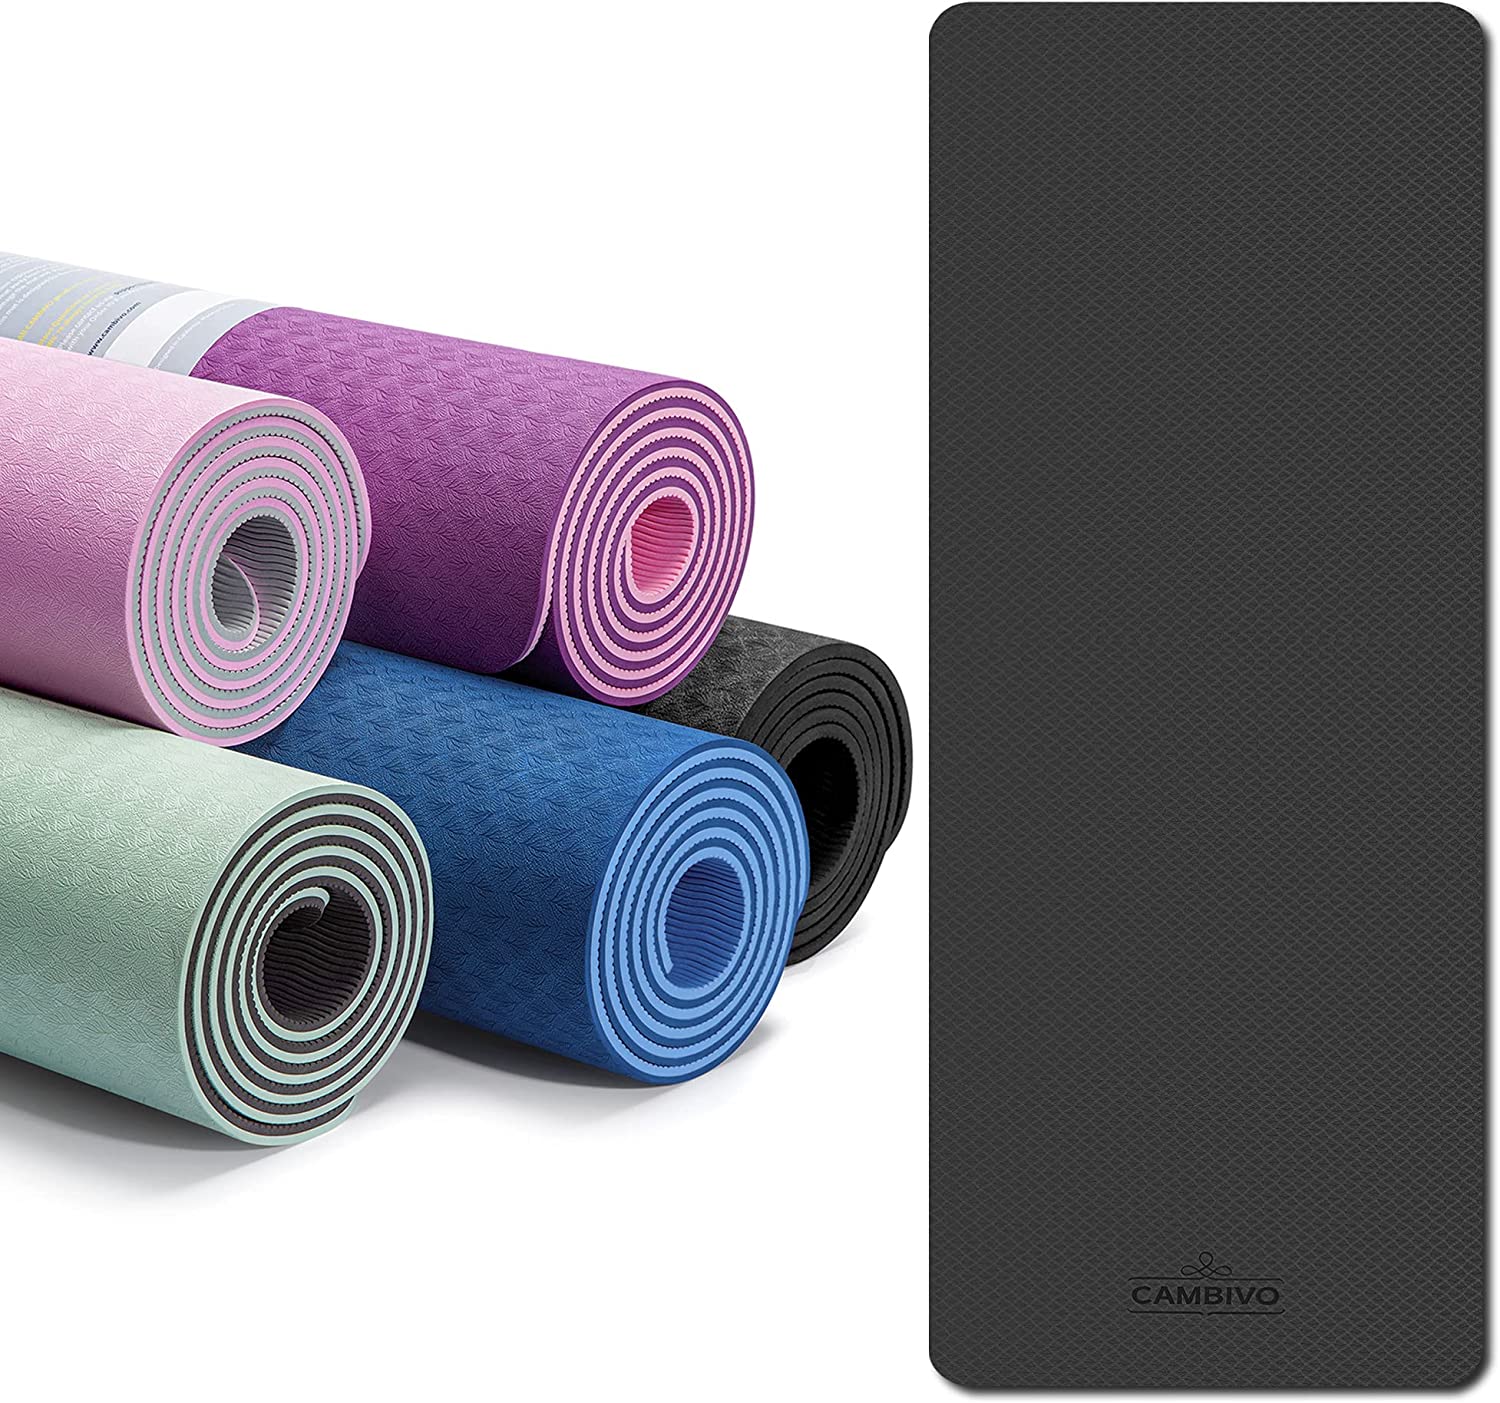  CAMBIVO Extra Thick Yoga Mat for Women Men Kids, Professional TPE Yoga Mats, Workout Mat with Carrying Strap for Yoga, Pilates and Floor Exercises